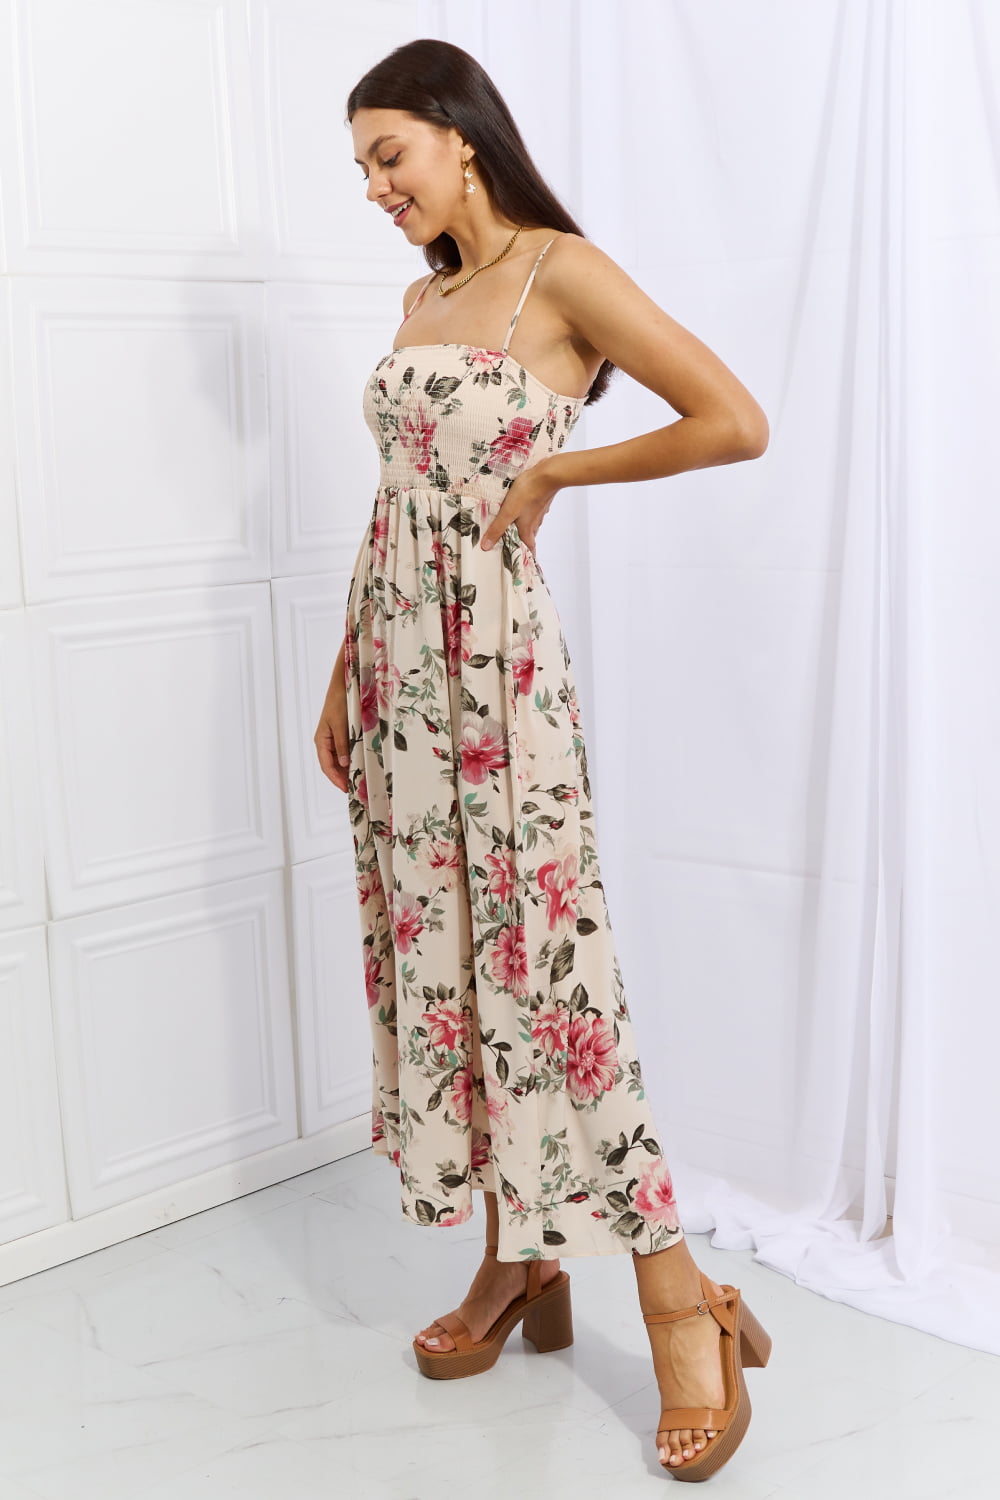 OneTheLand Hold Me Tight Sleevless Floral Maxi Dress in Pink - AnnRose Boutique